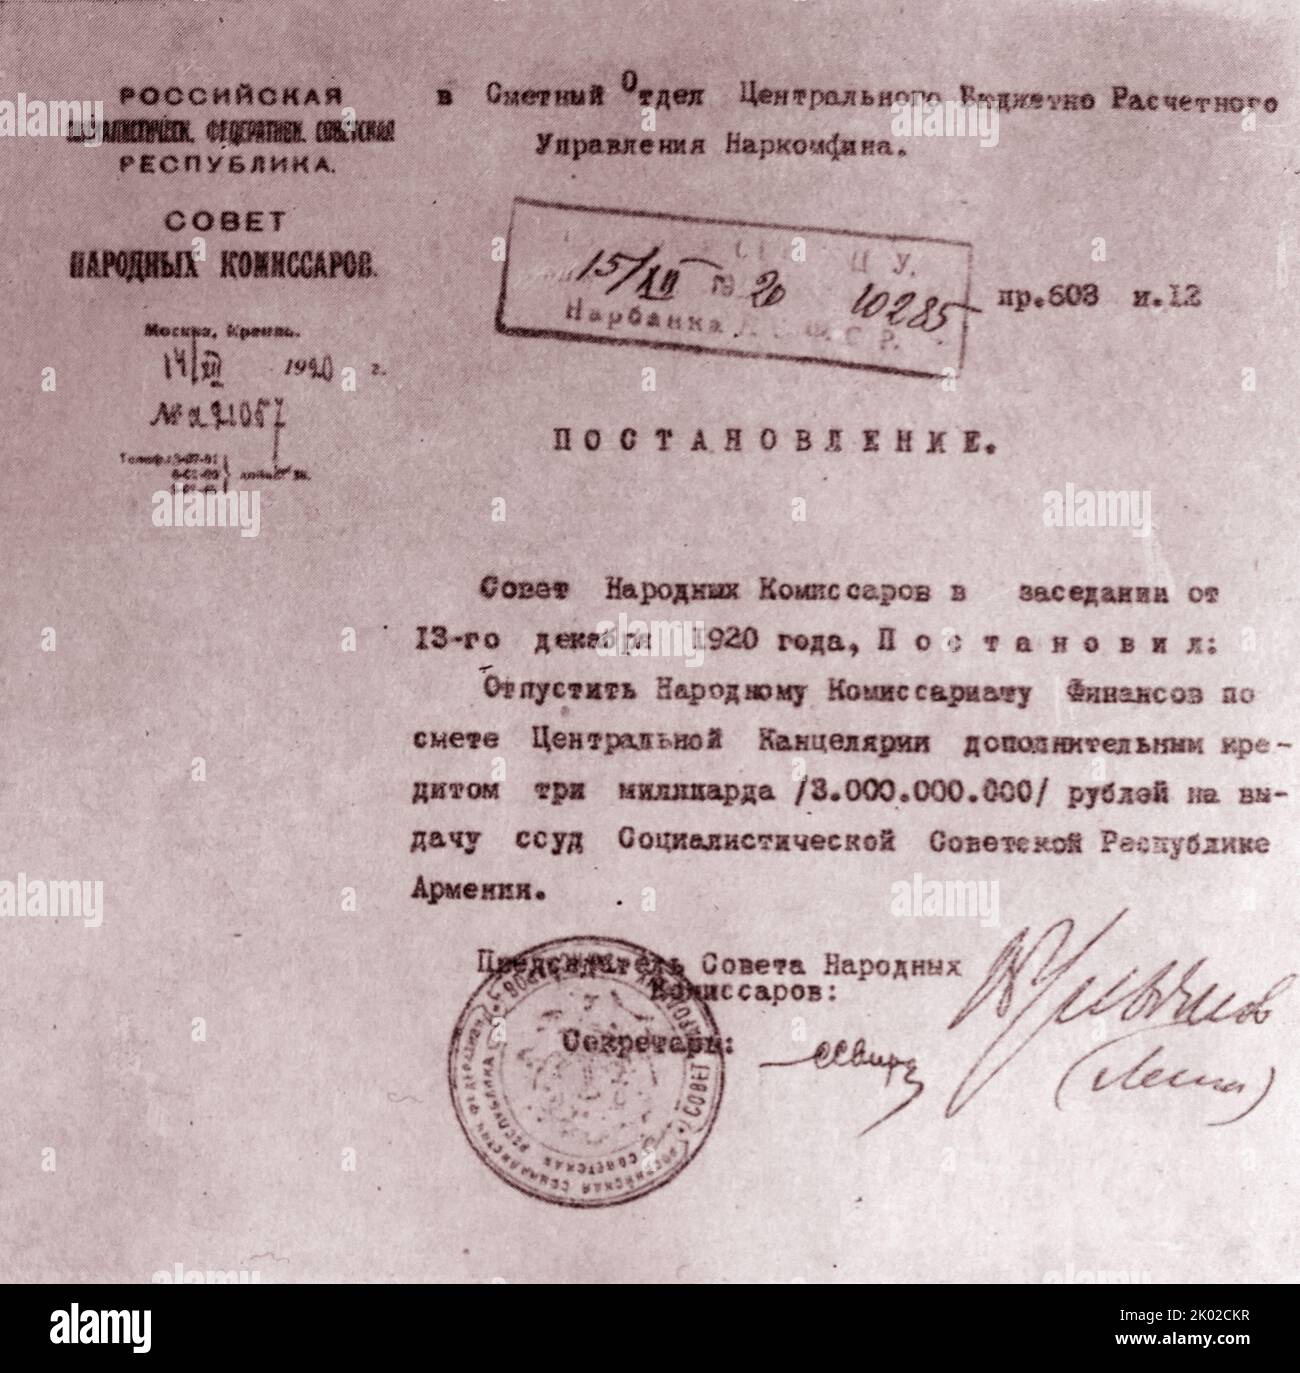 Order of the Council of Peoples Commissars of the RSFSR regarding giving out subsidies to Soviet Armenia. 13th of December, 1920.&#13;&#10; Stock Photo